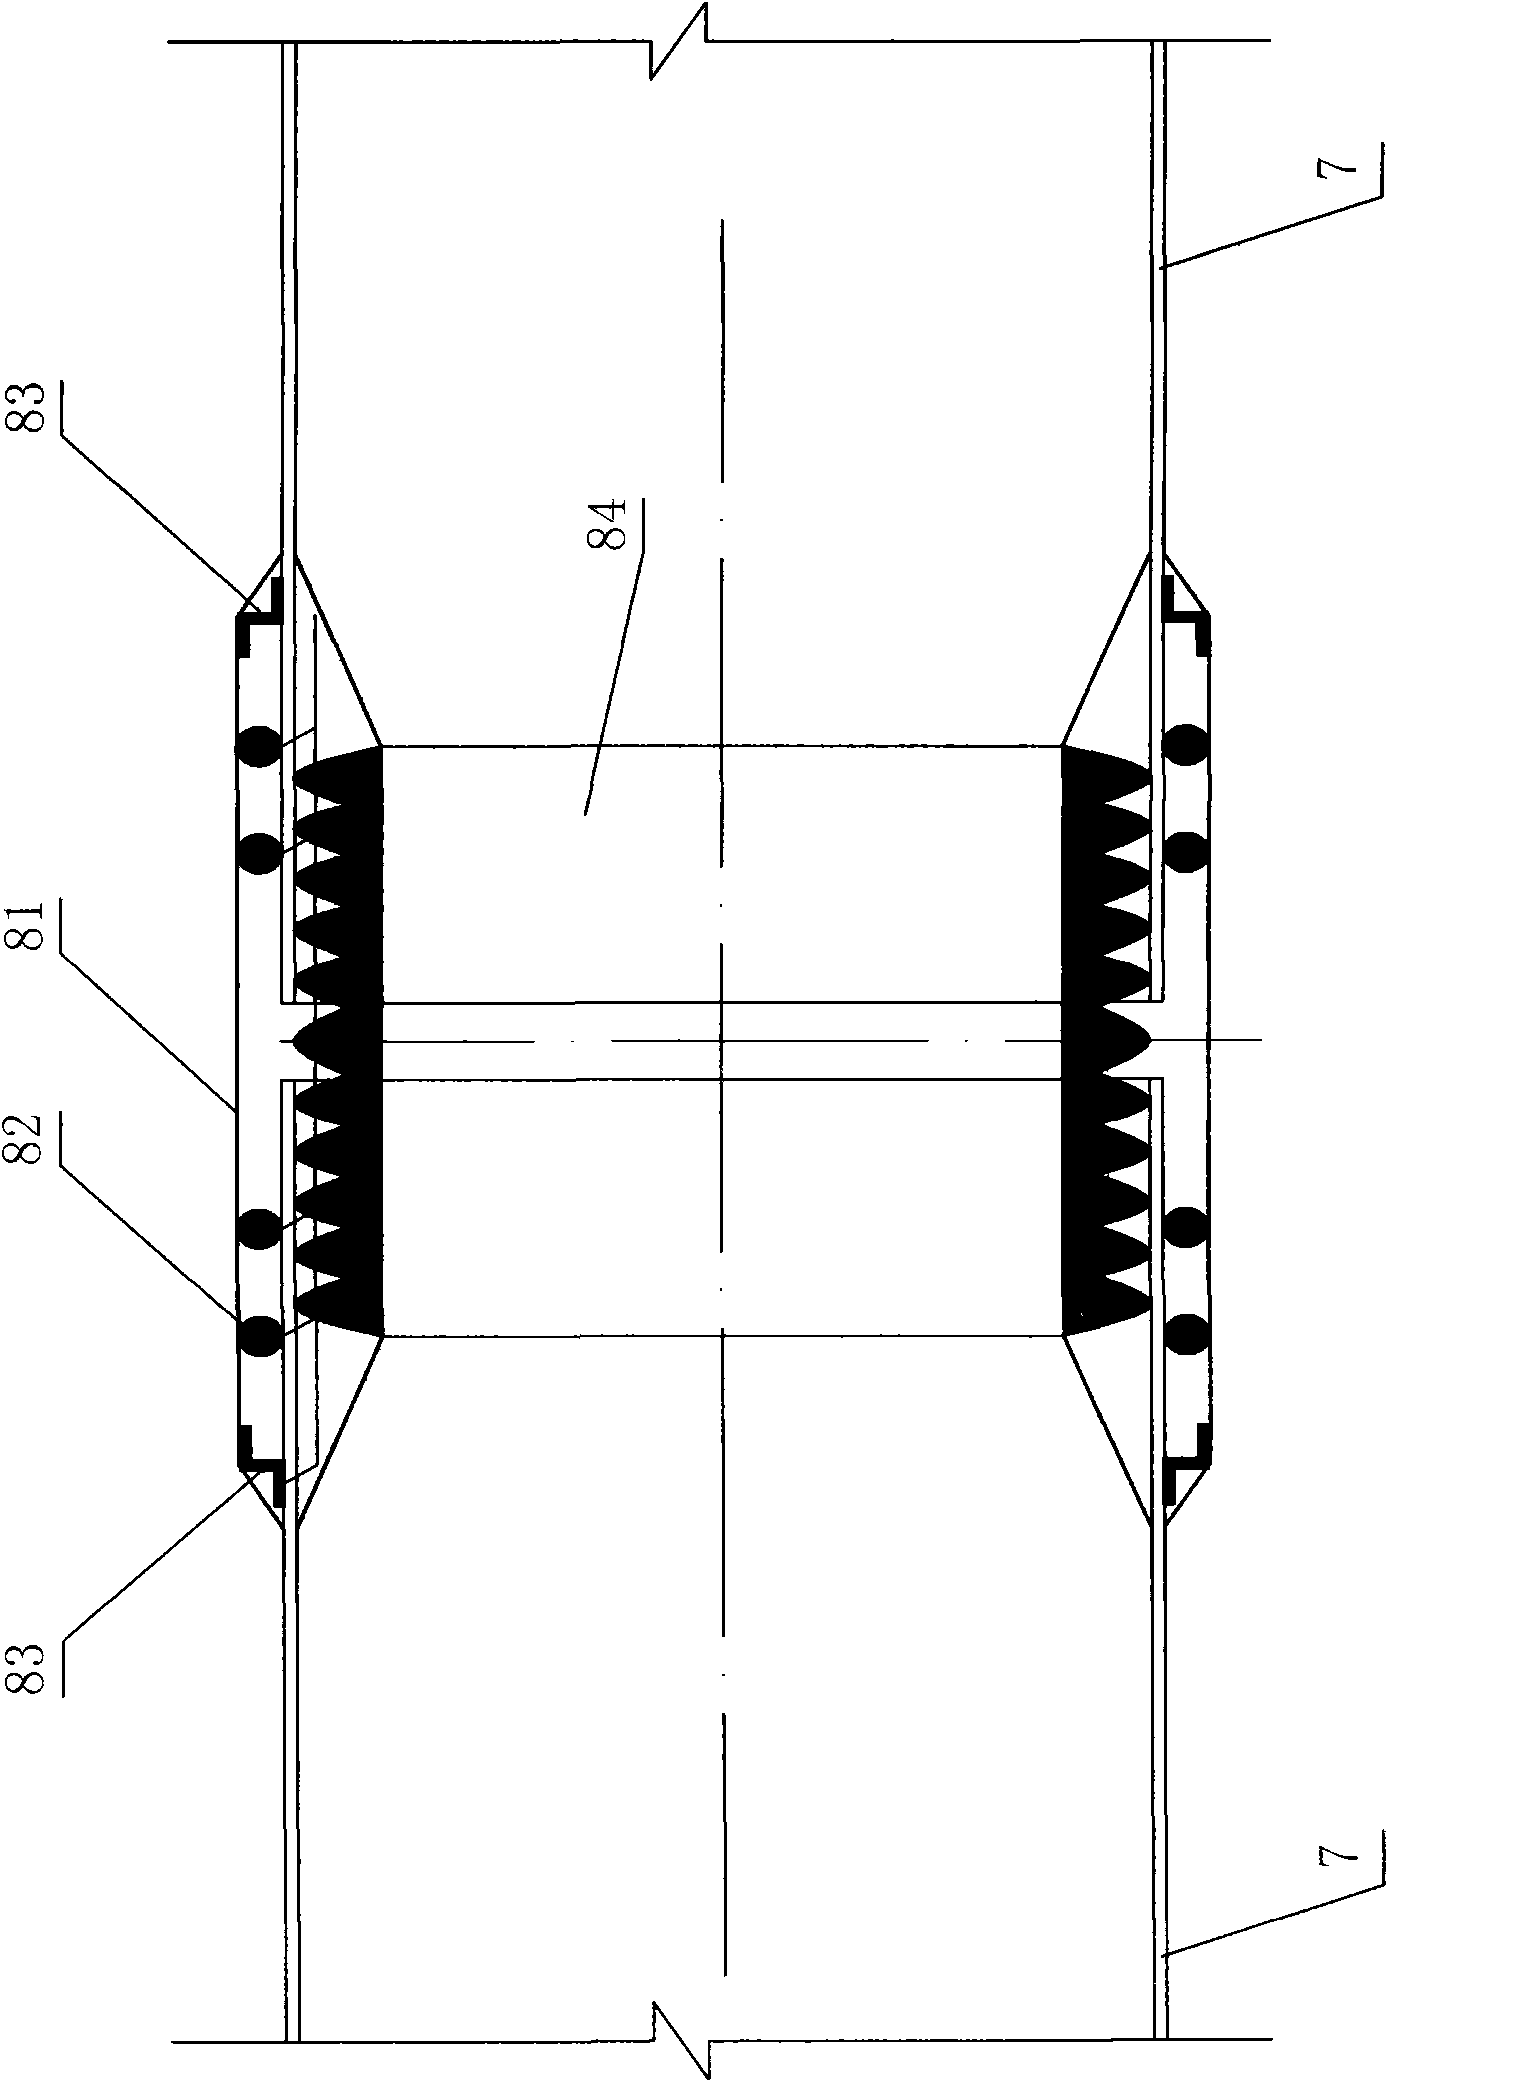 Small-bore long distance curved pipe jacking method